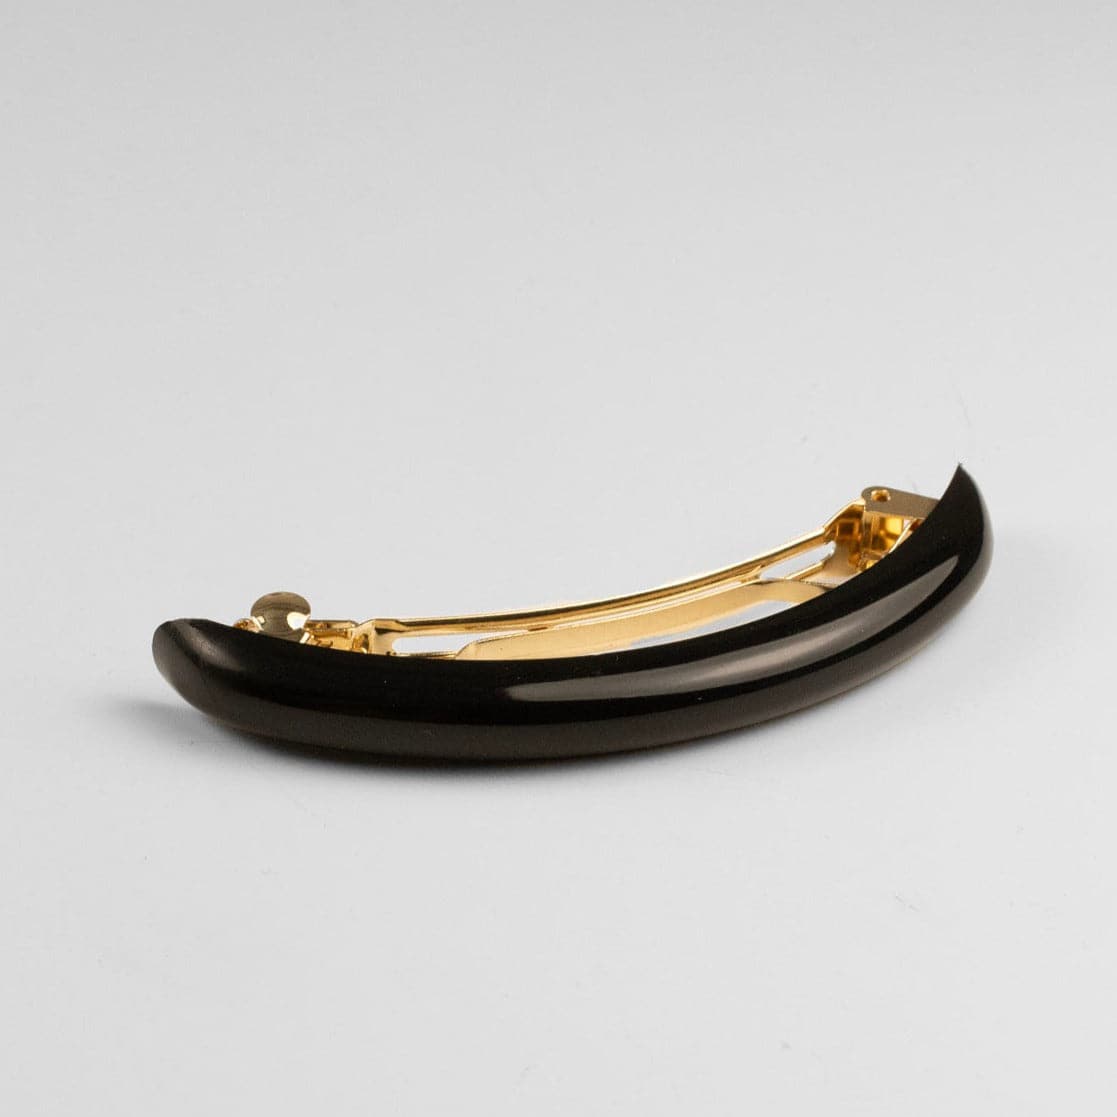 Narrow Arched French Barrette Clip in Black Essentials French Hair Accessories at Tegen Accessories